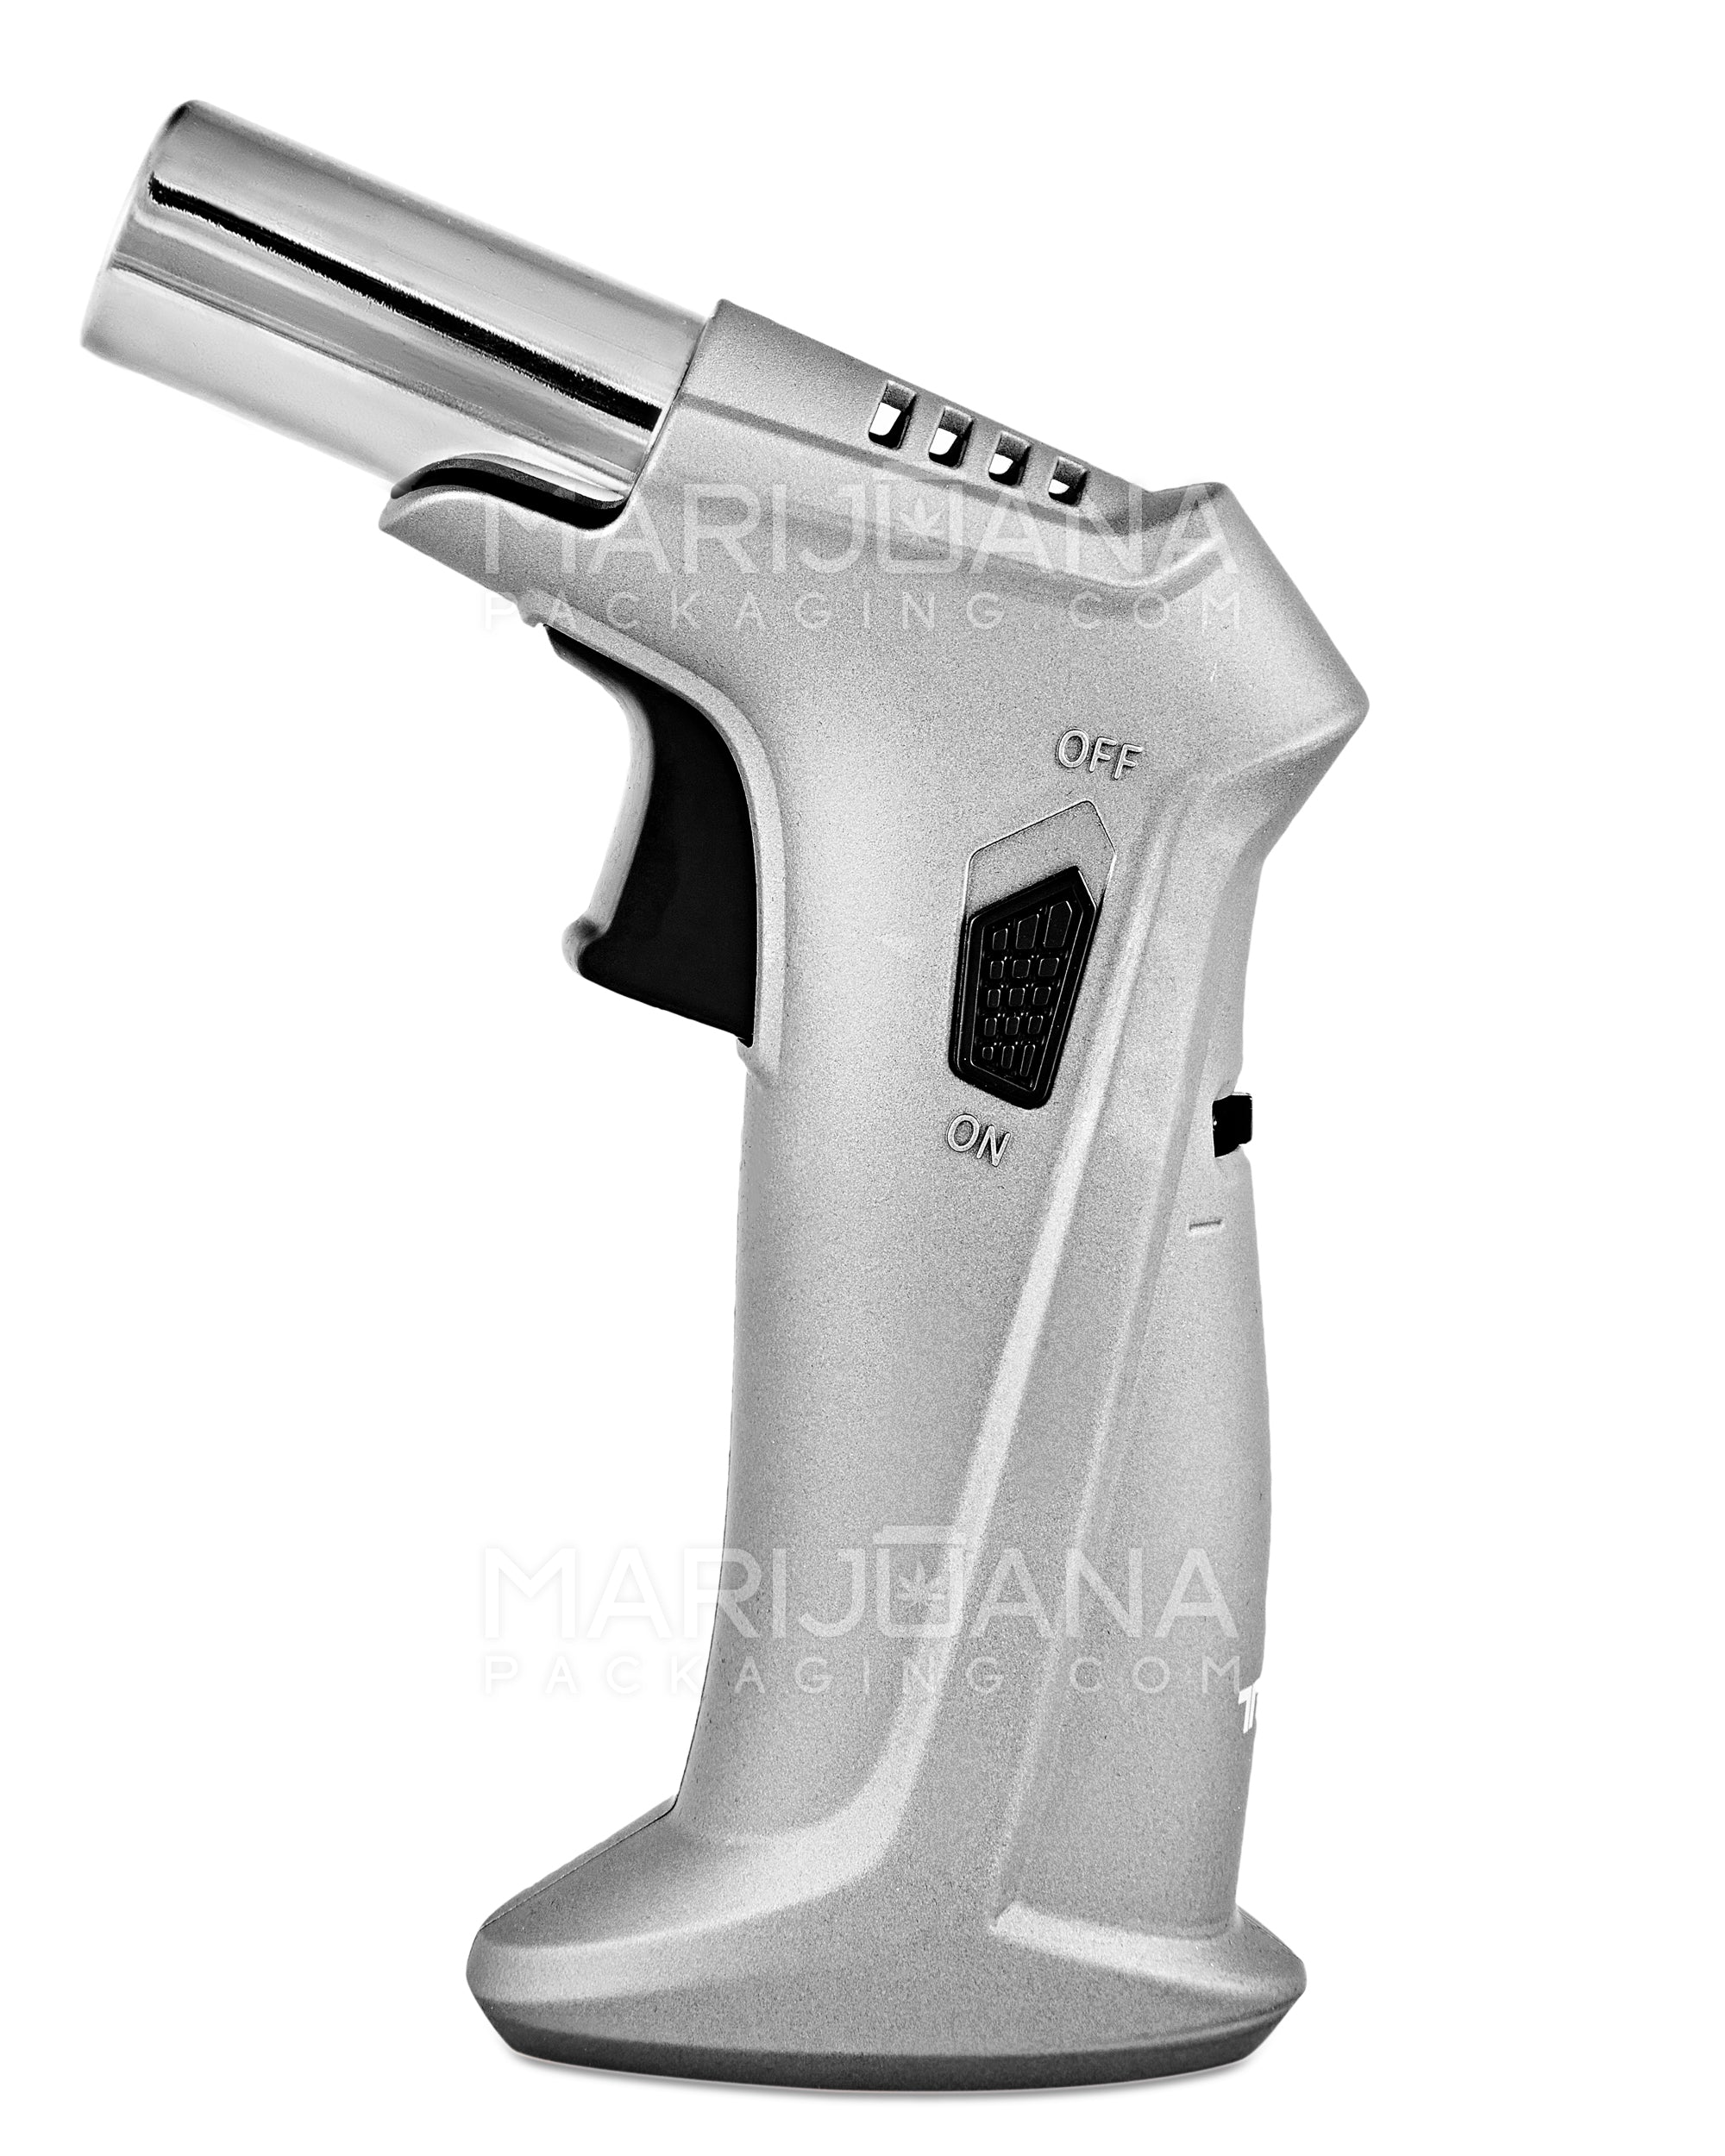 TECHNO | High Angle Metal Torch w/ Safety Lock | 6.5in Tall - Butane - Gray - 1